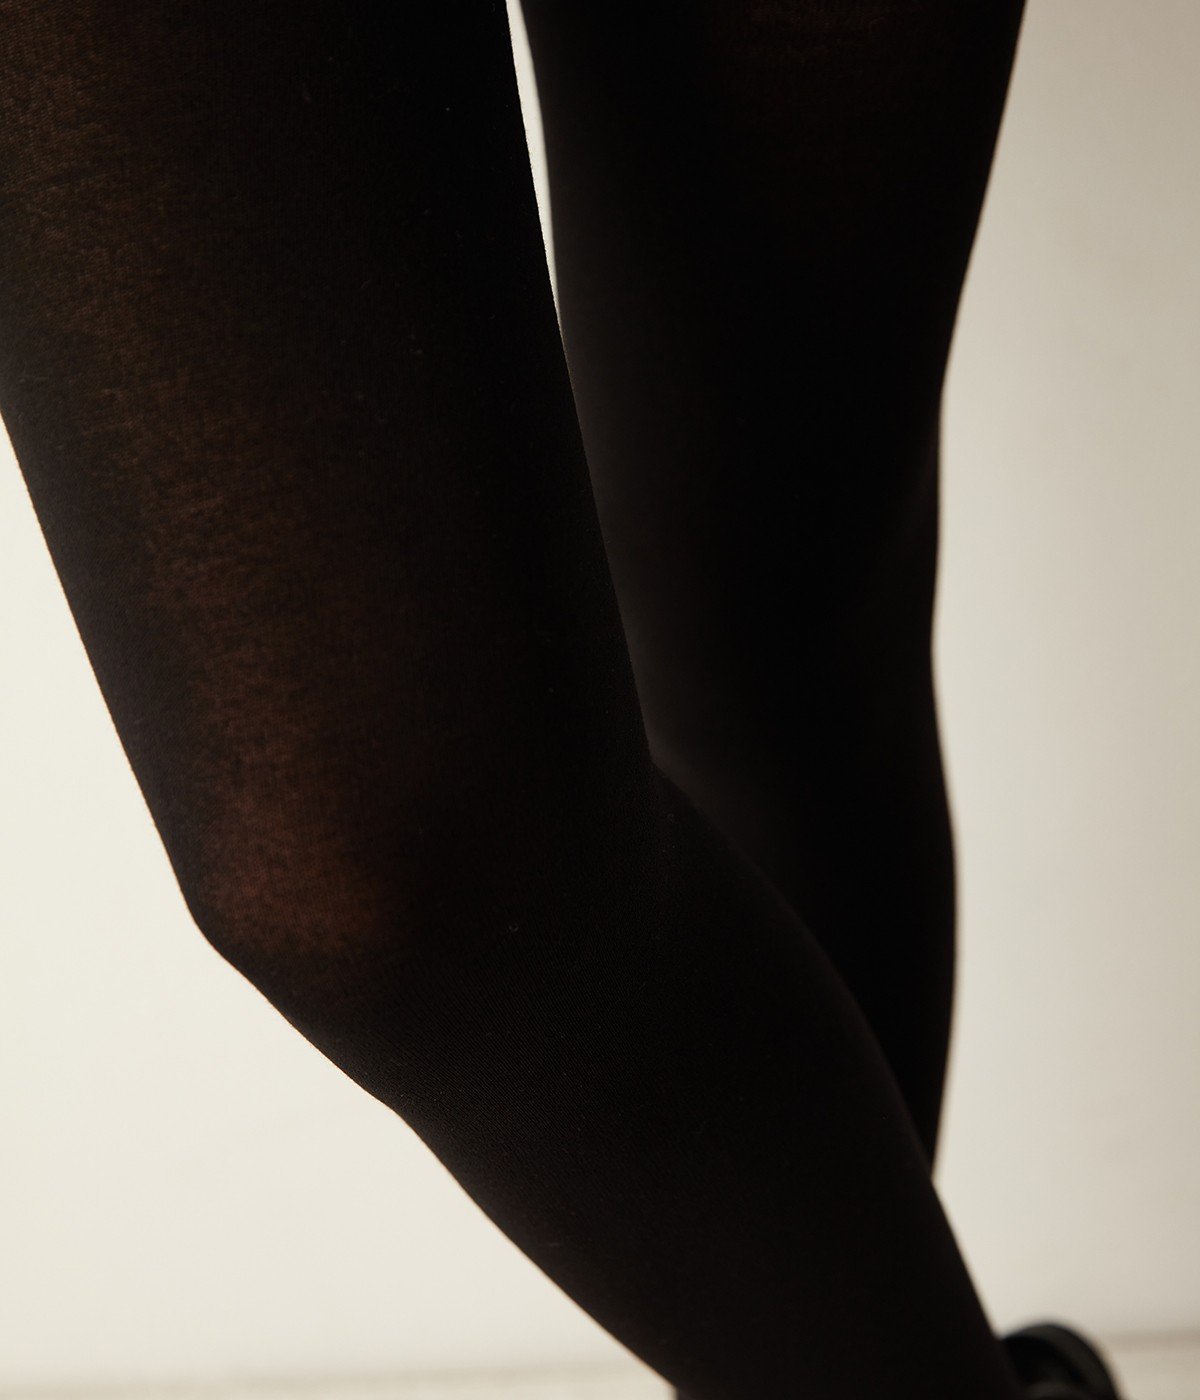 Cashmere Tights